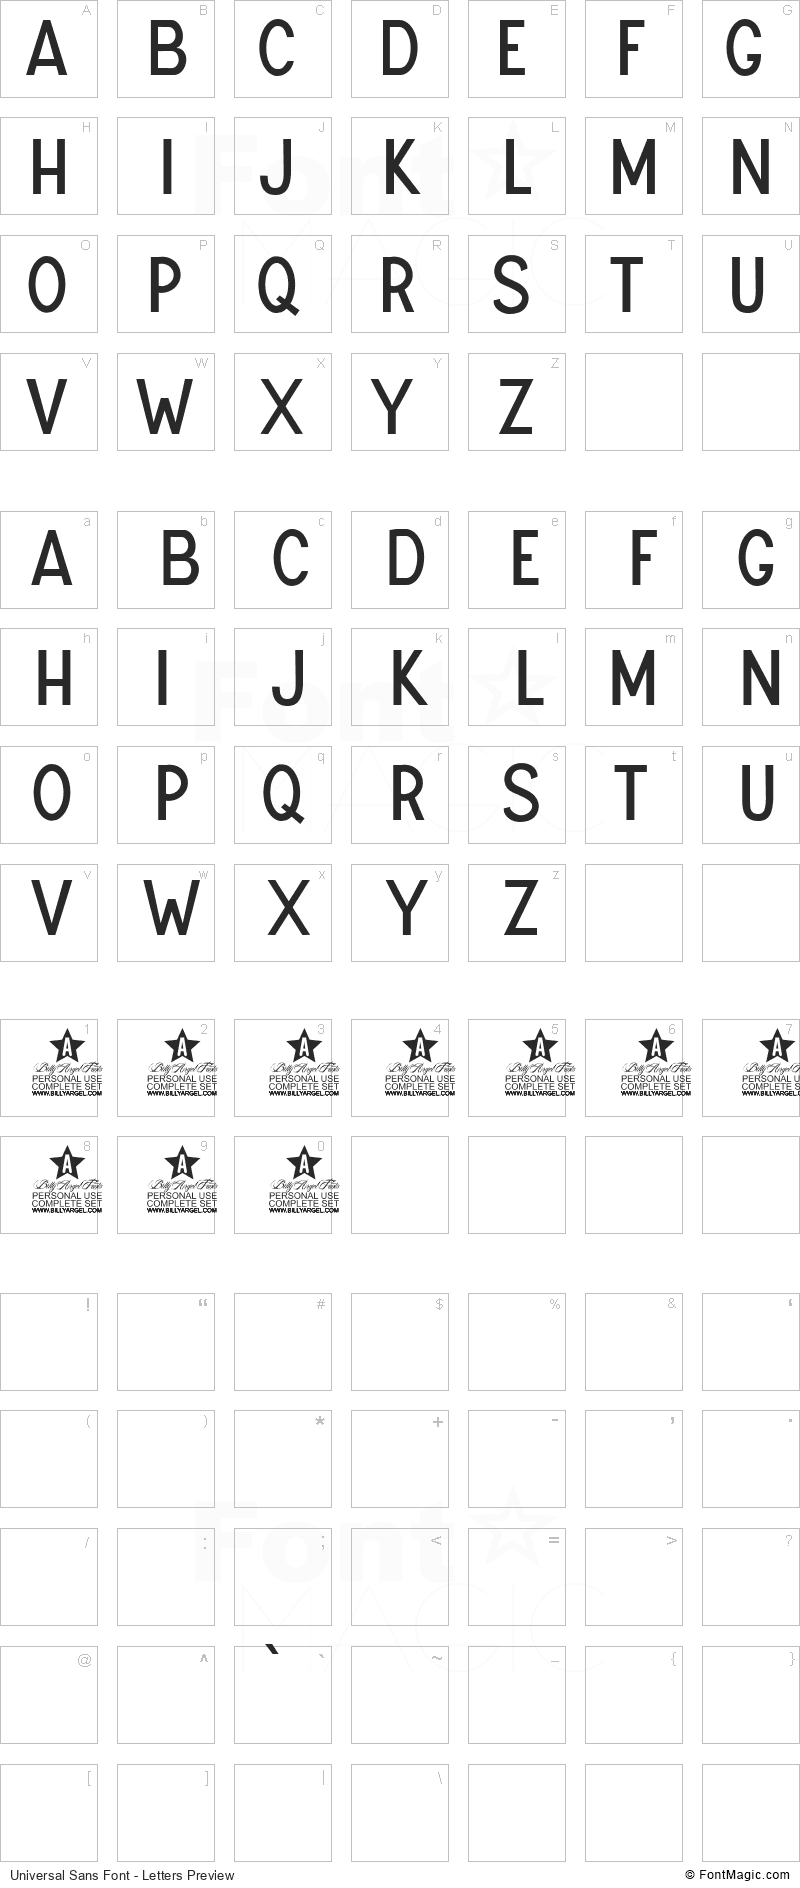 Universal Sans Font - All Latters Preview Chart